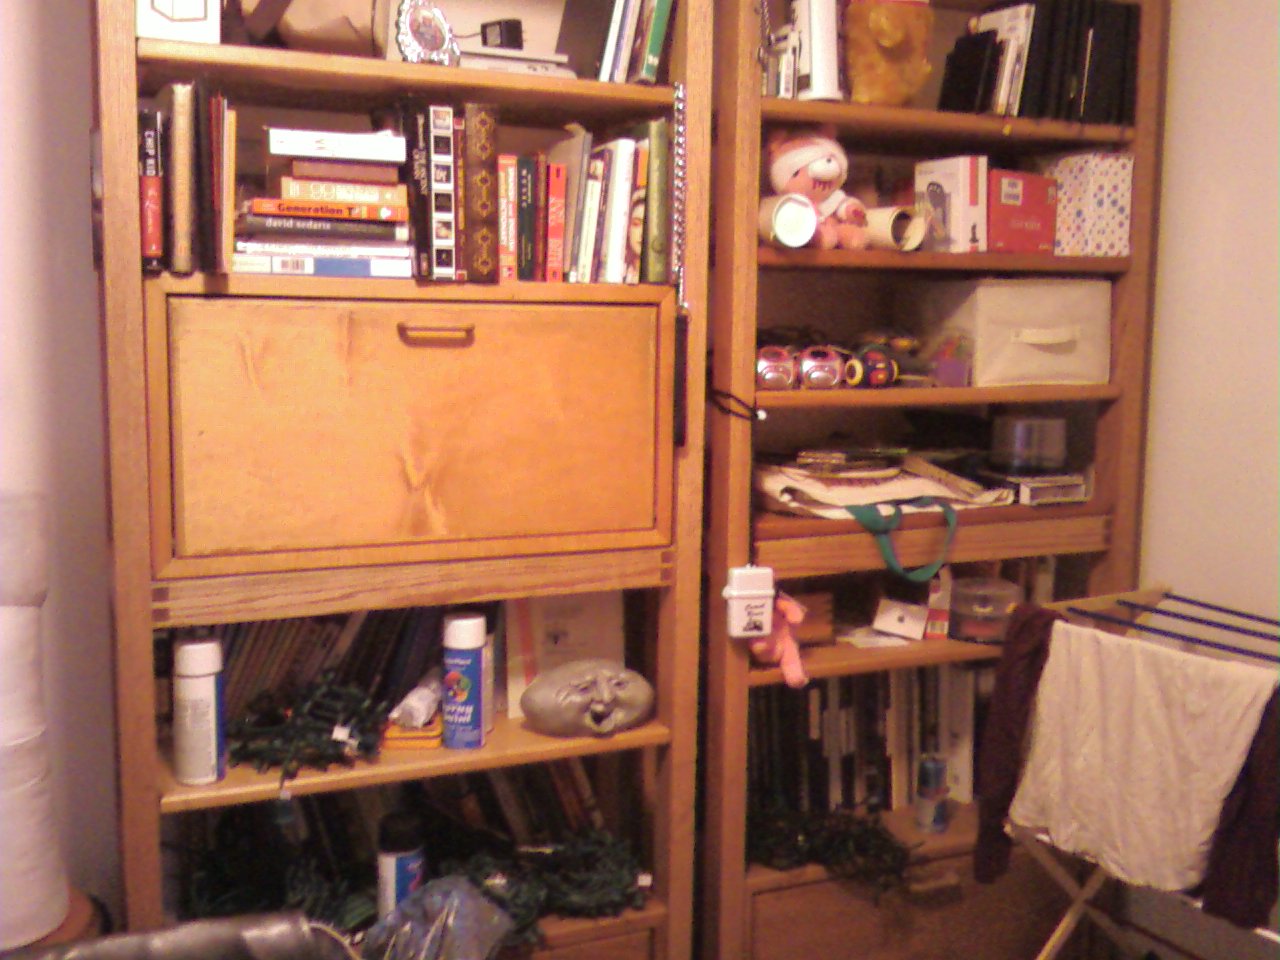 a bookcase full of books and a laundry hamper in the foreground